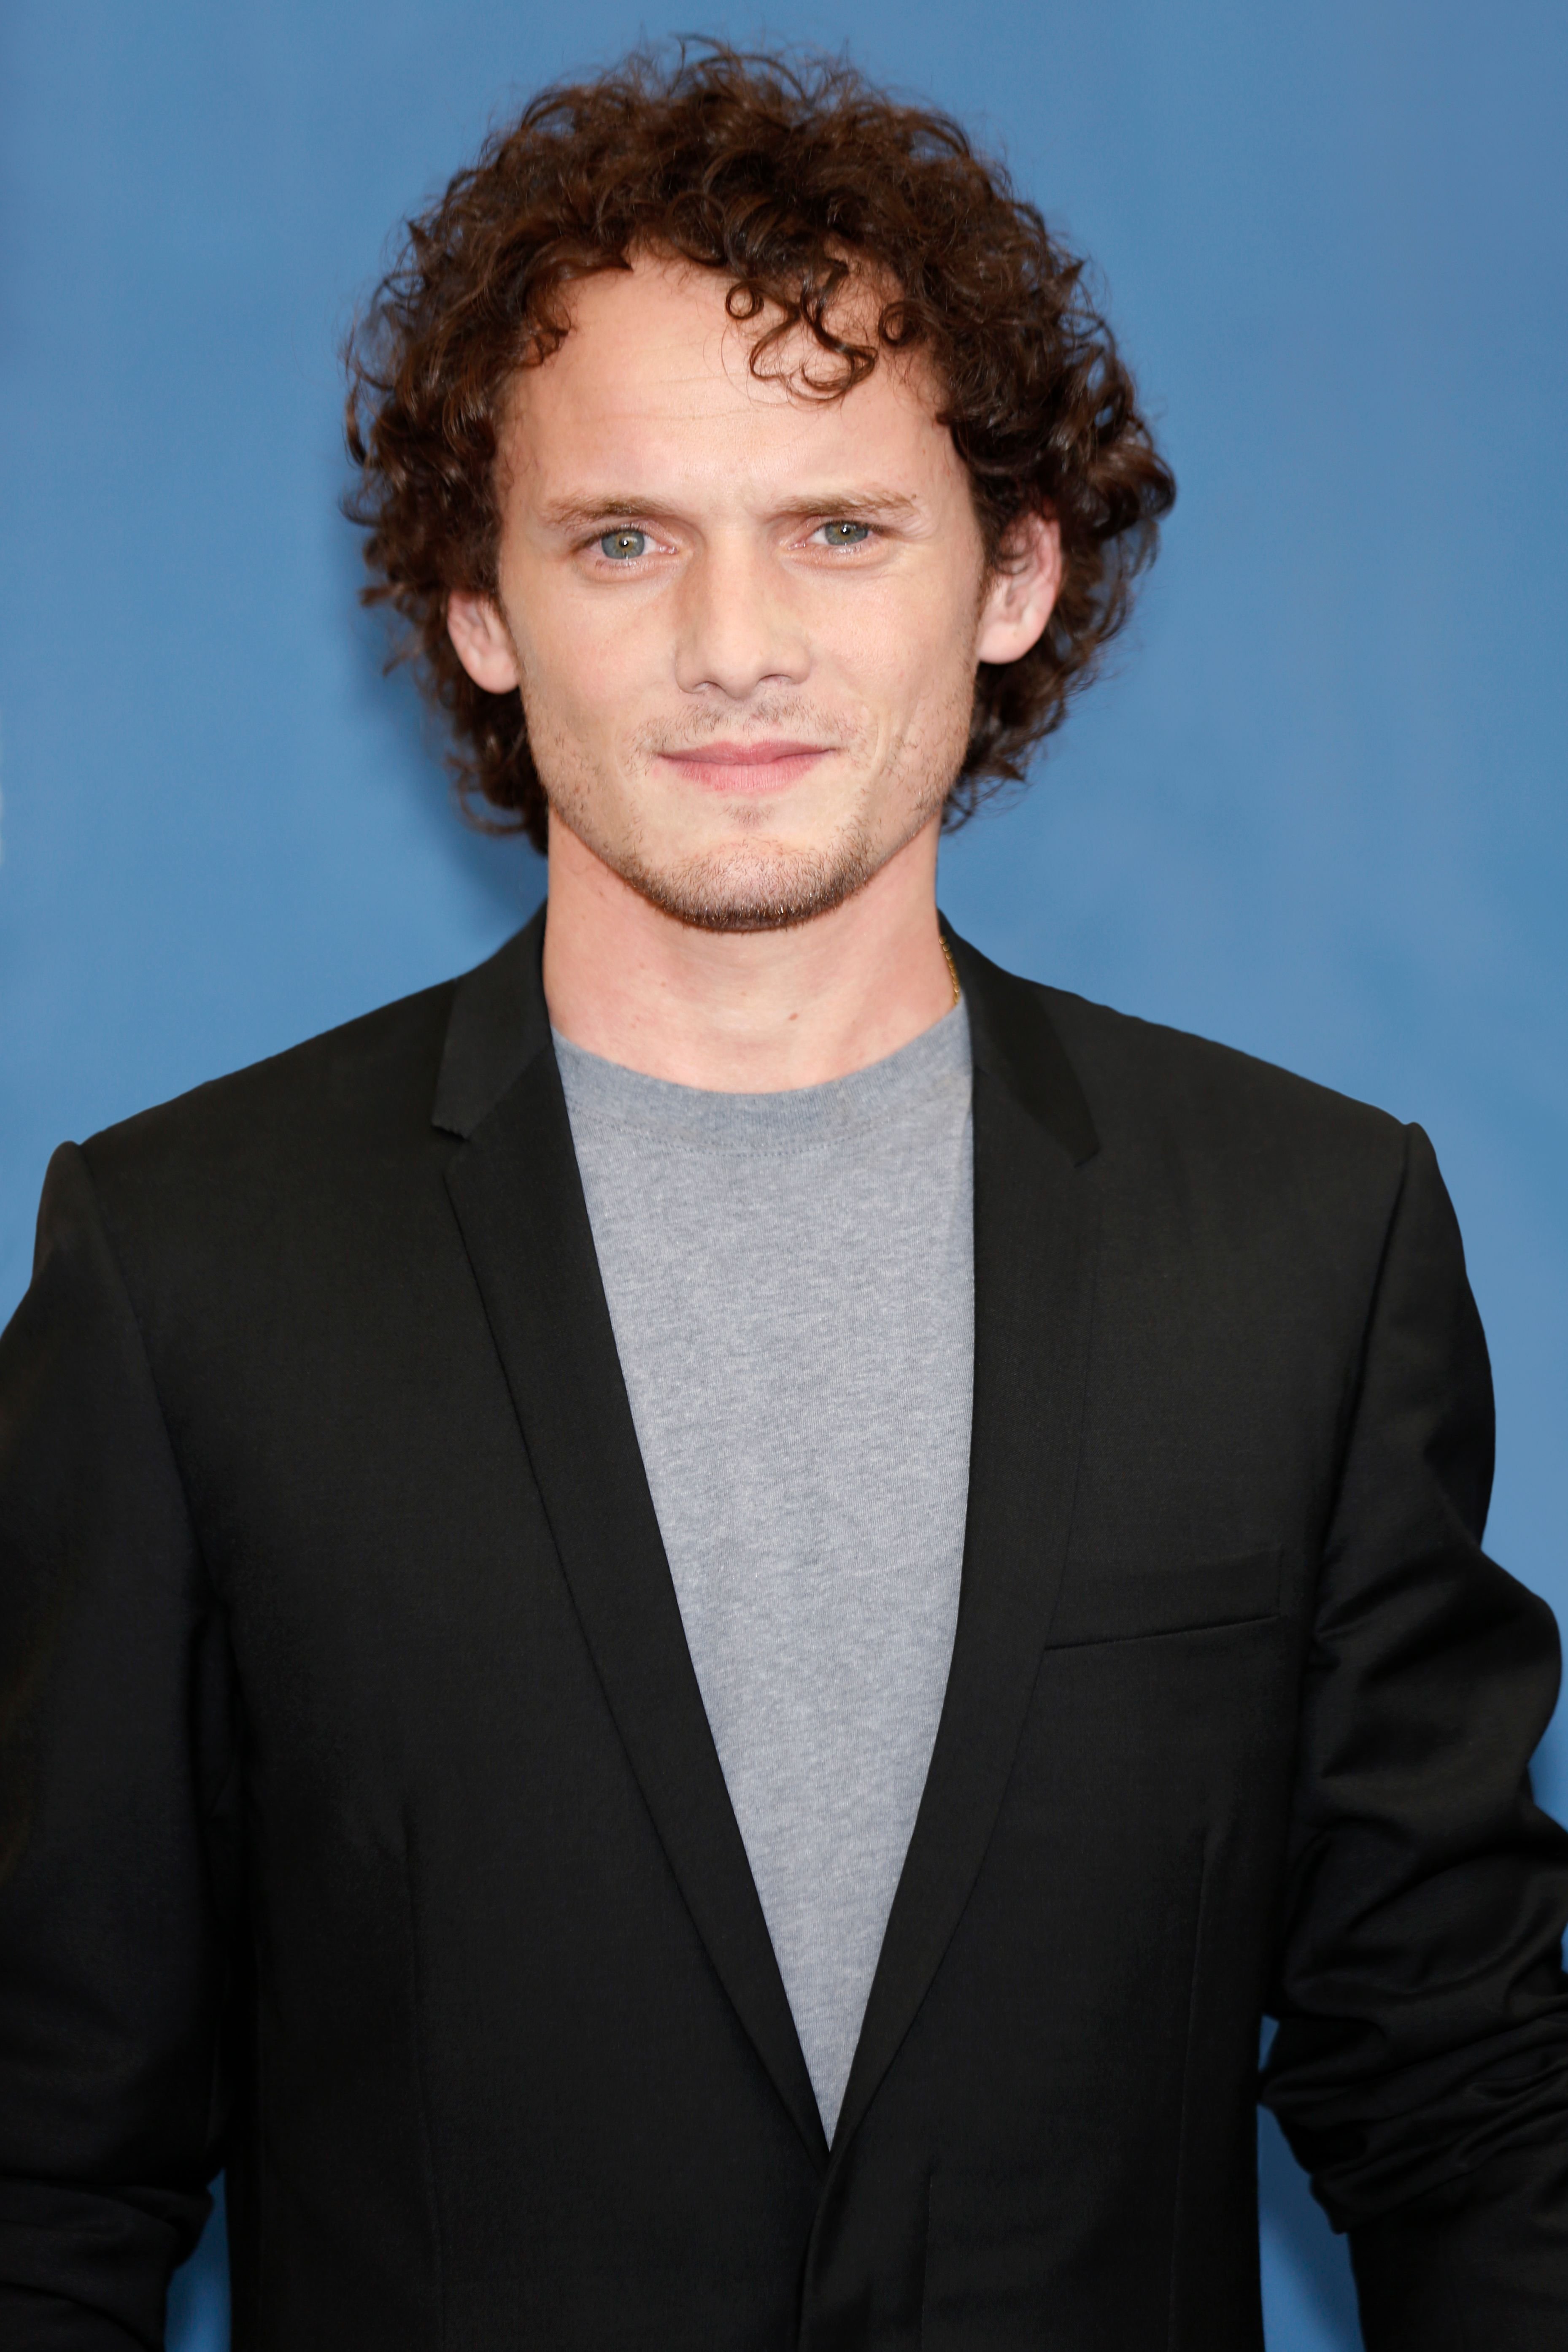 Anton Yelchin at the 71st Venice Film Festival in September 2014 in Italy | Source: Getty Images